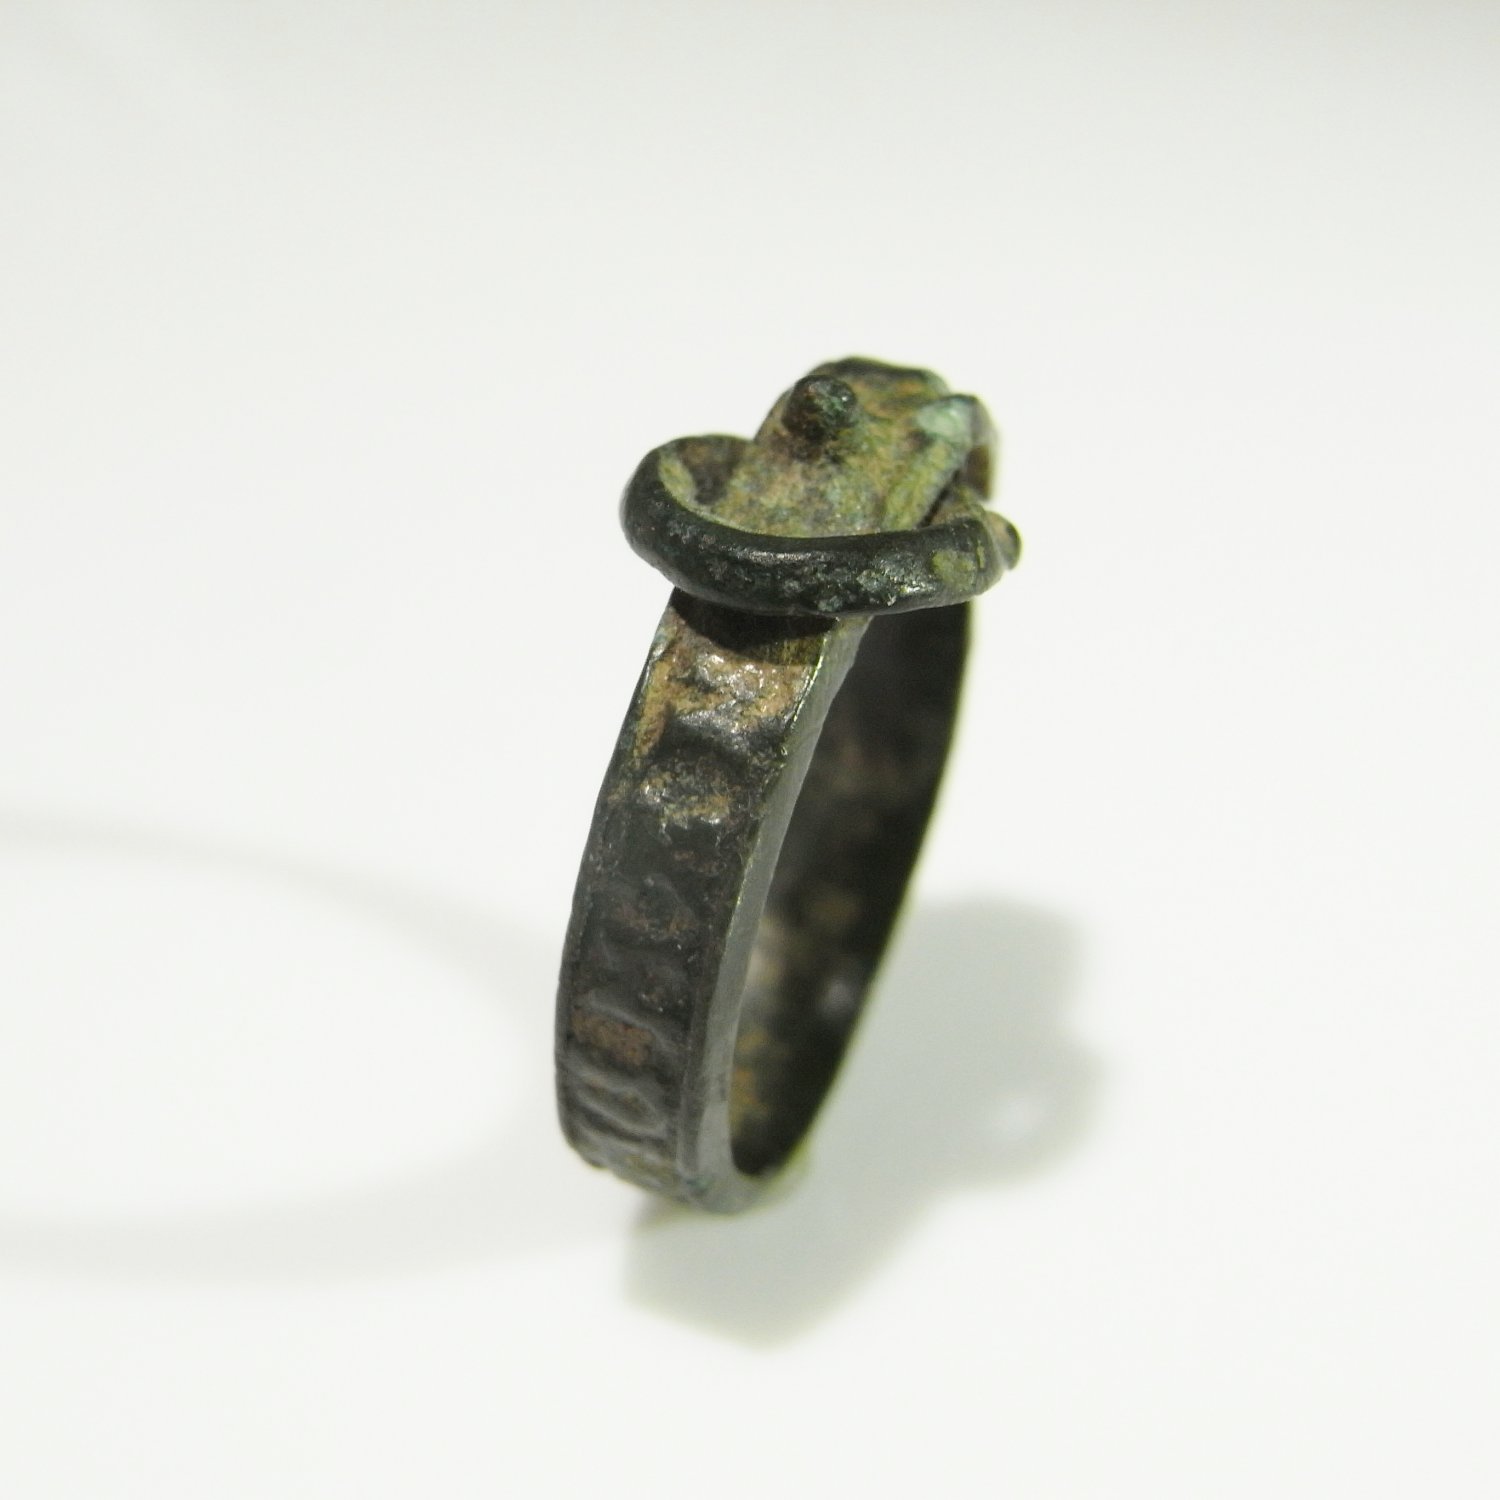 Bronze Ancient Ring Medieval Middle Ages Ring Museum Quality 14th Century Religious Bronze Buckle Ring "Mater Dei Mamanto" Inscribed Inscription Religious Jewelry Amulet Exceptional Extreme Rare